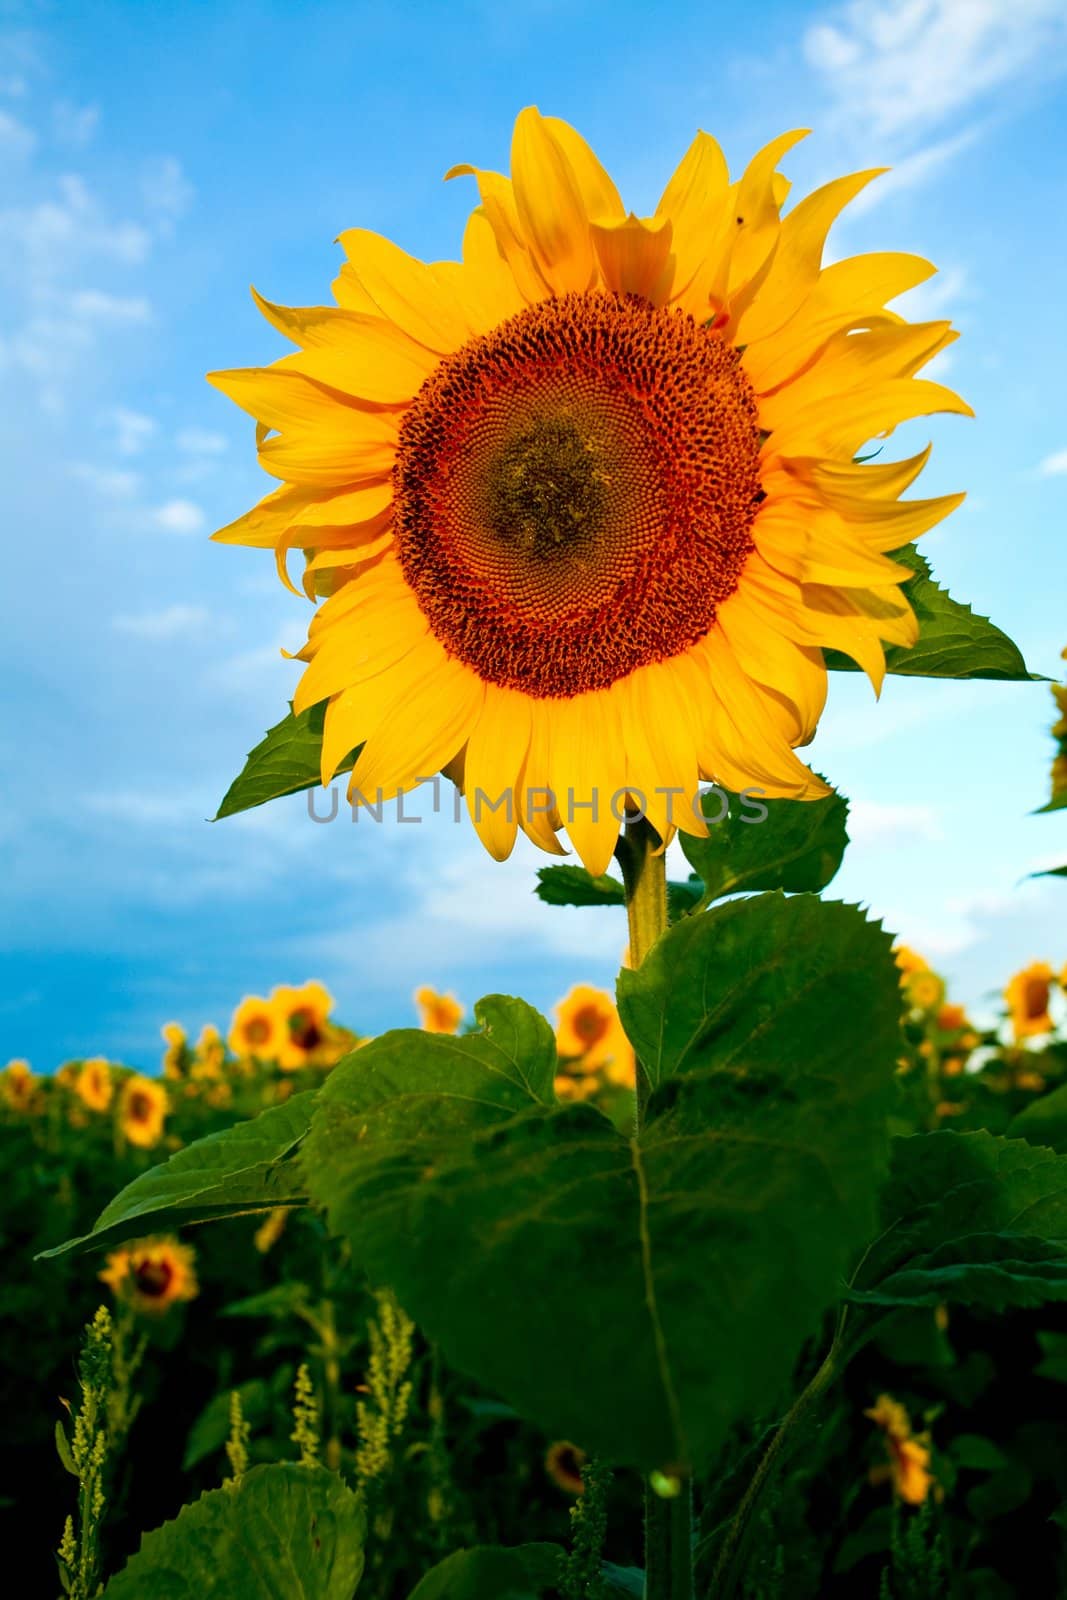 An image of a field of bright yellow sunflowers